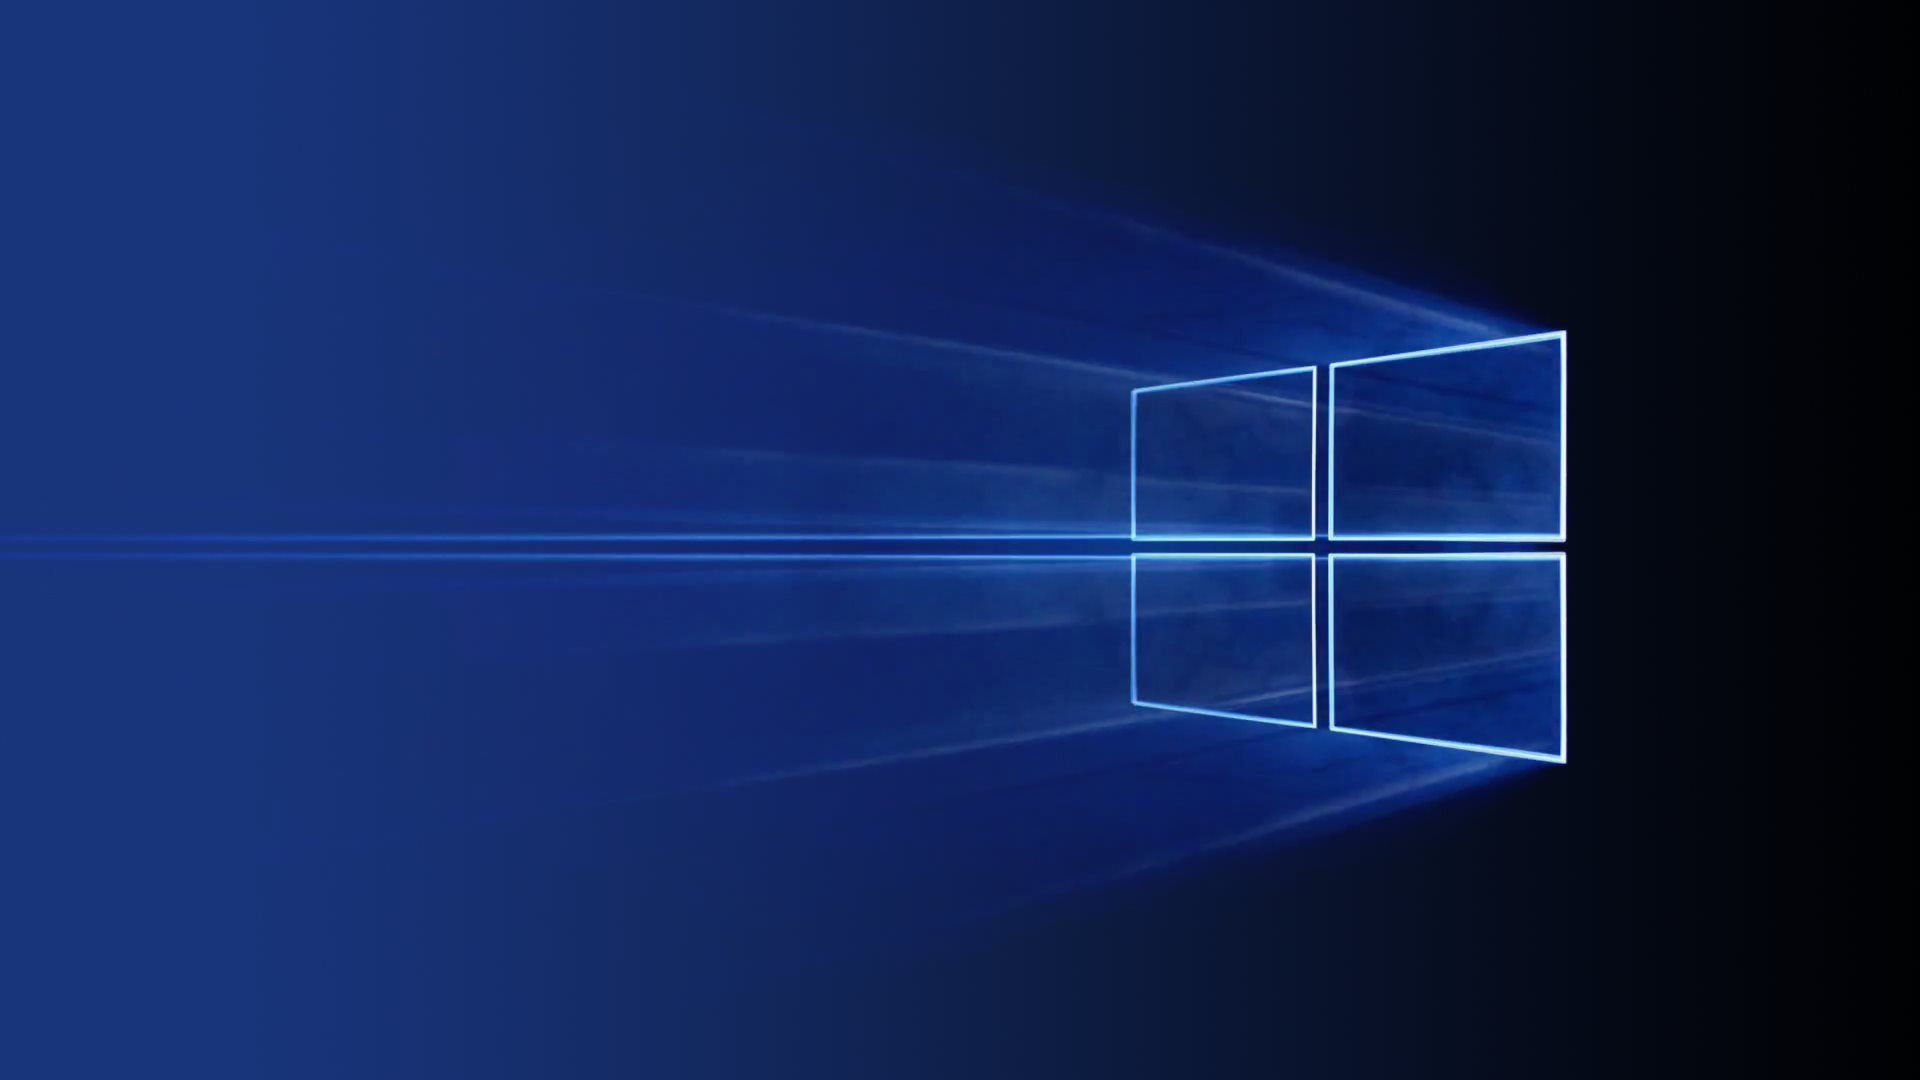 Microsoft Wallpapers HD Desktop Backgrounds Images and Pictures